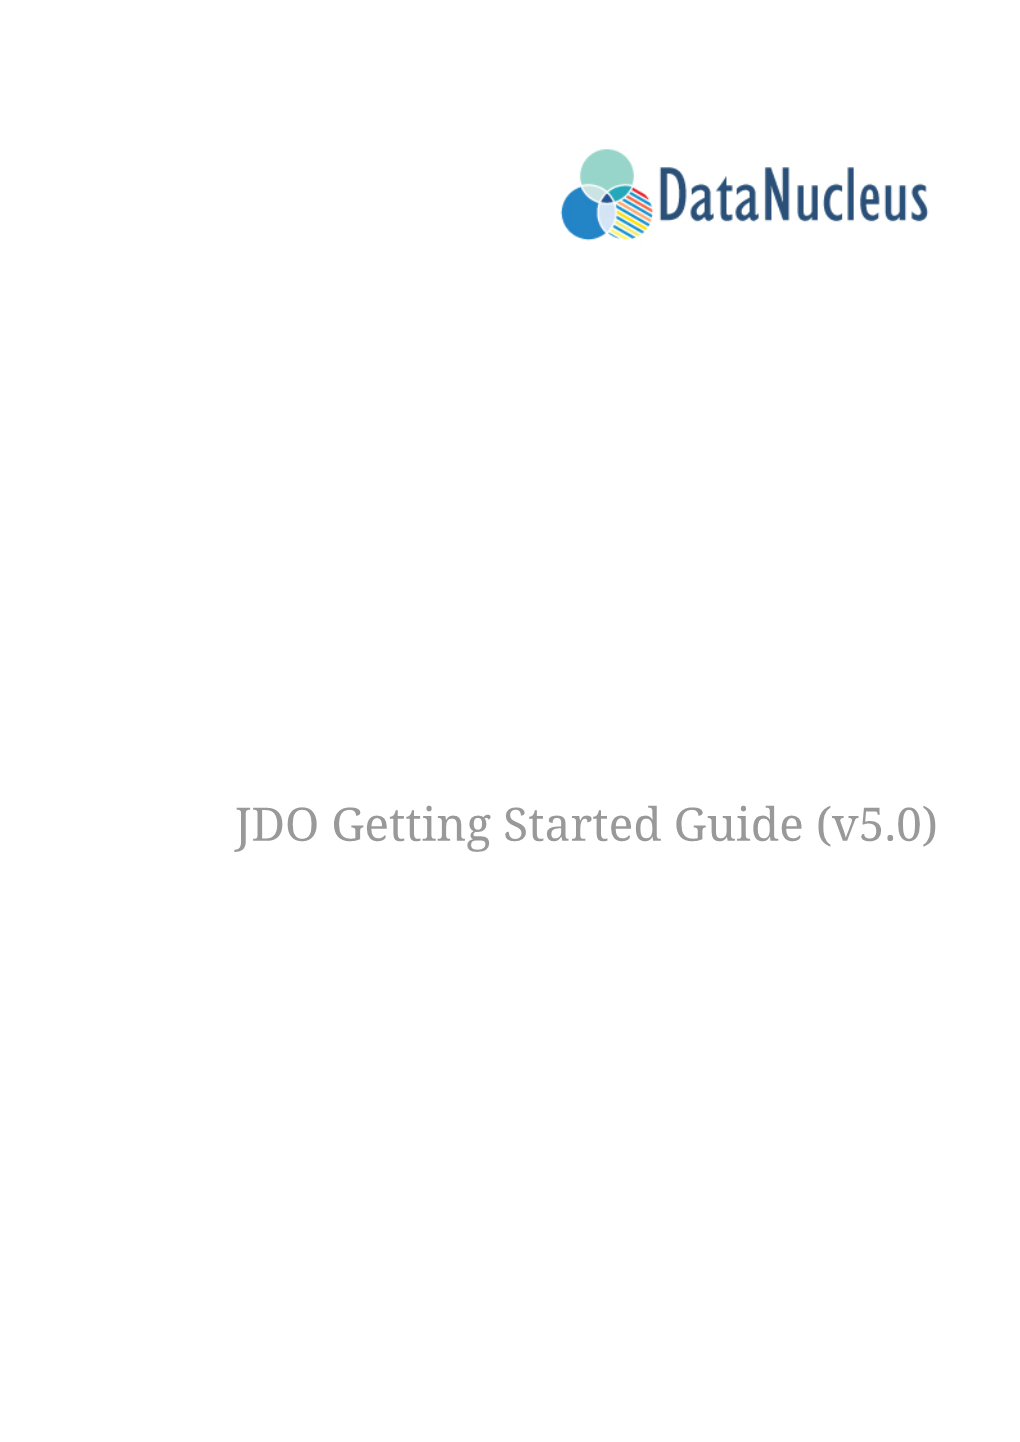 JDO Getting Started Guide (V5.0) Table of Contents